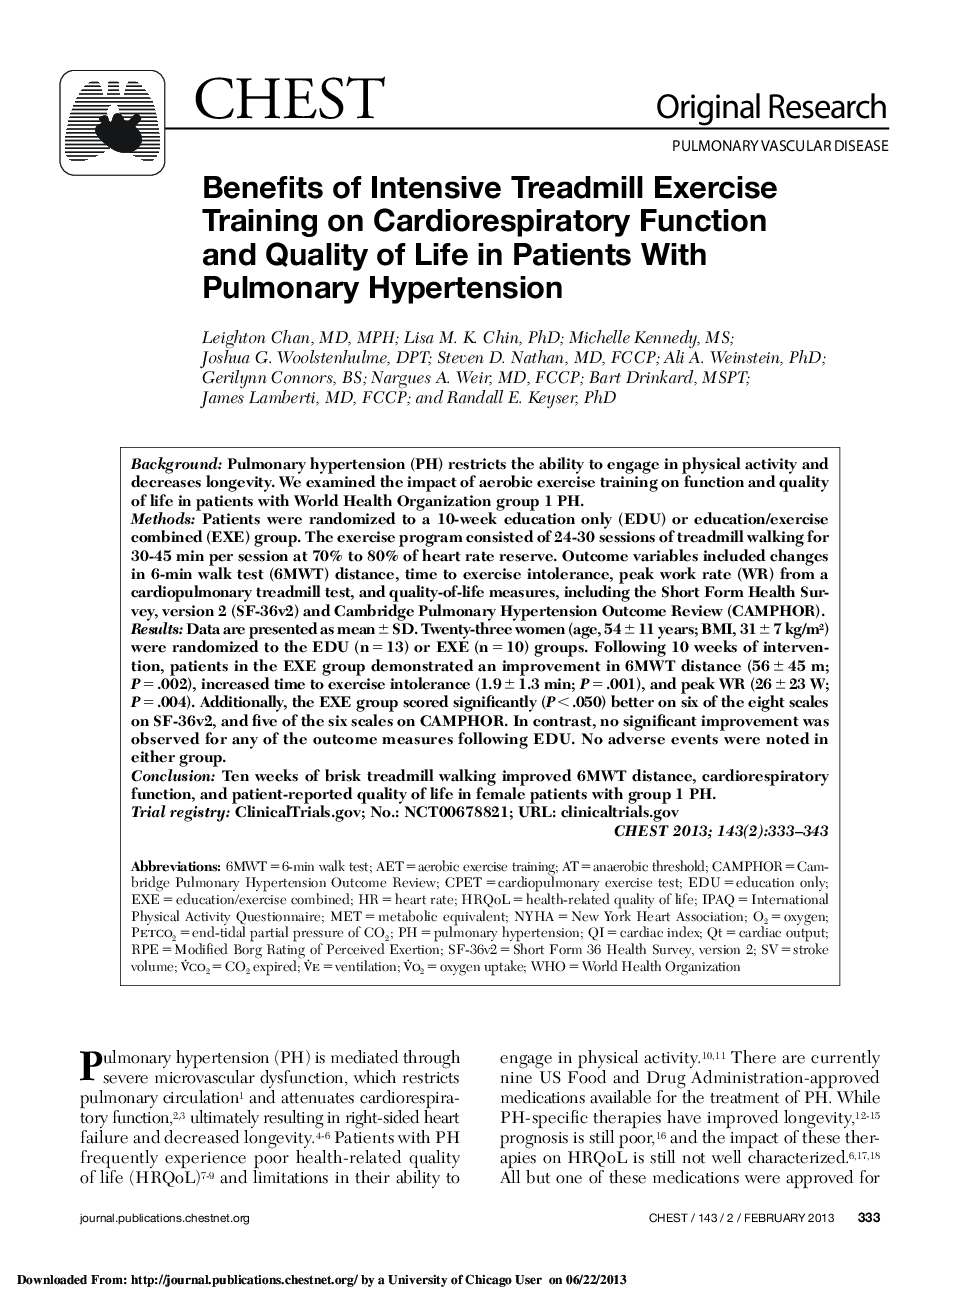 Benefits of Intensive Treadmill Exercise Training on Cardiorespiratory Function and Quality of Life in Patients With Pulmonary Hypertension